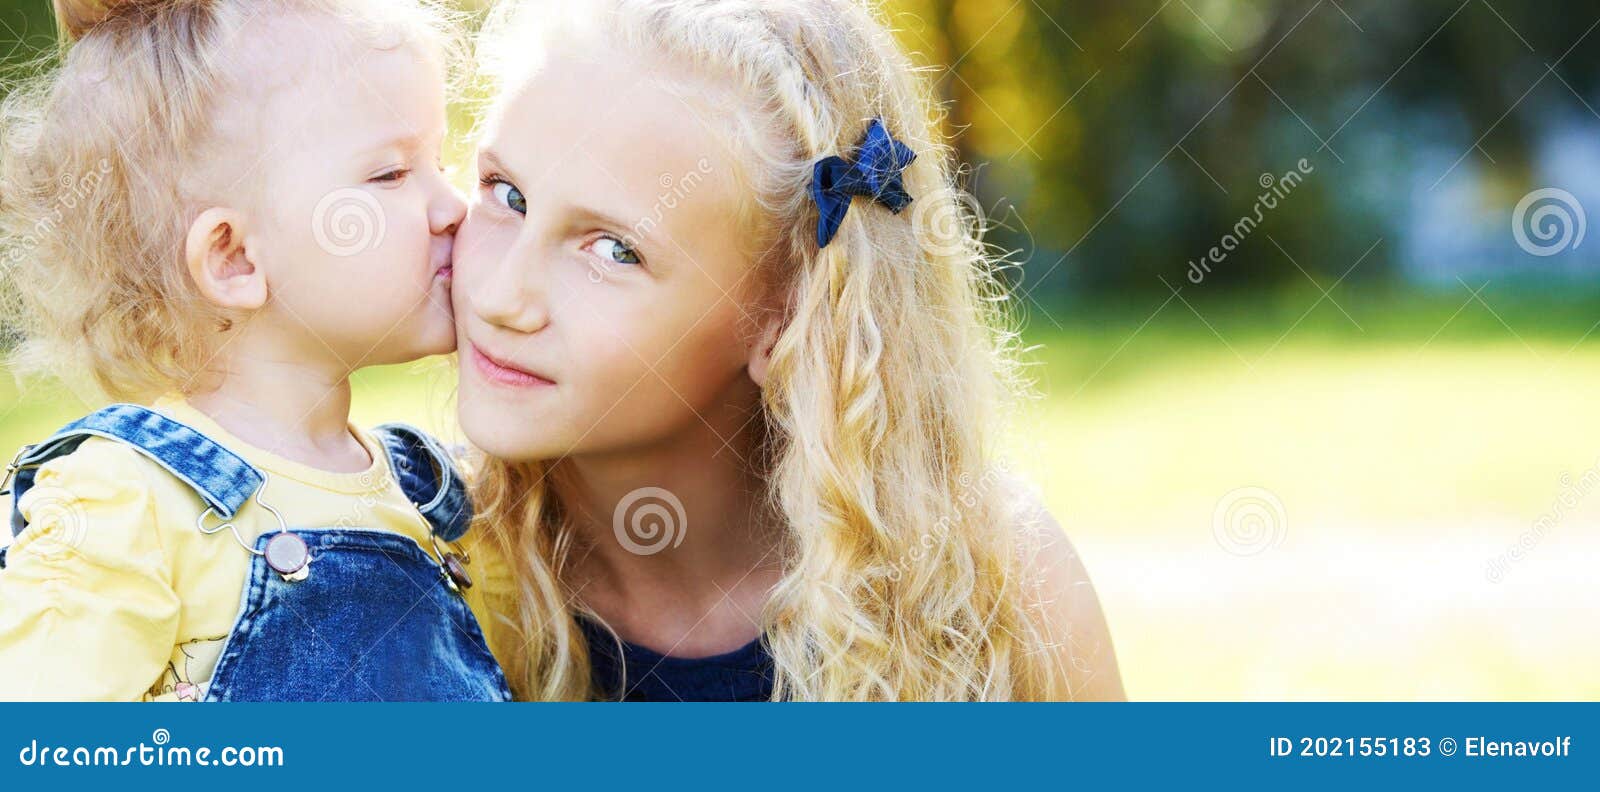 Cute Sisters Teen Baby Girl Playing Park Stock Photos - Free ...